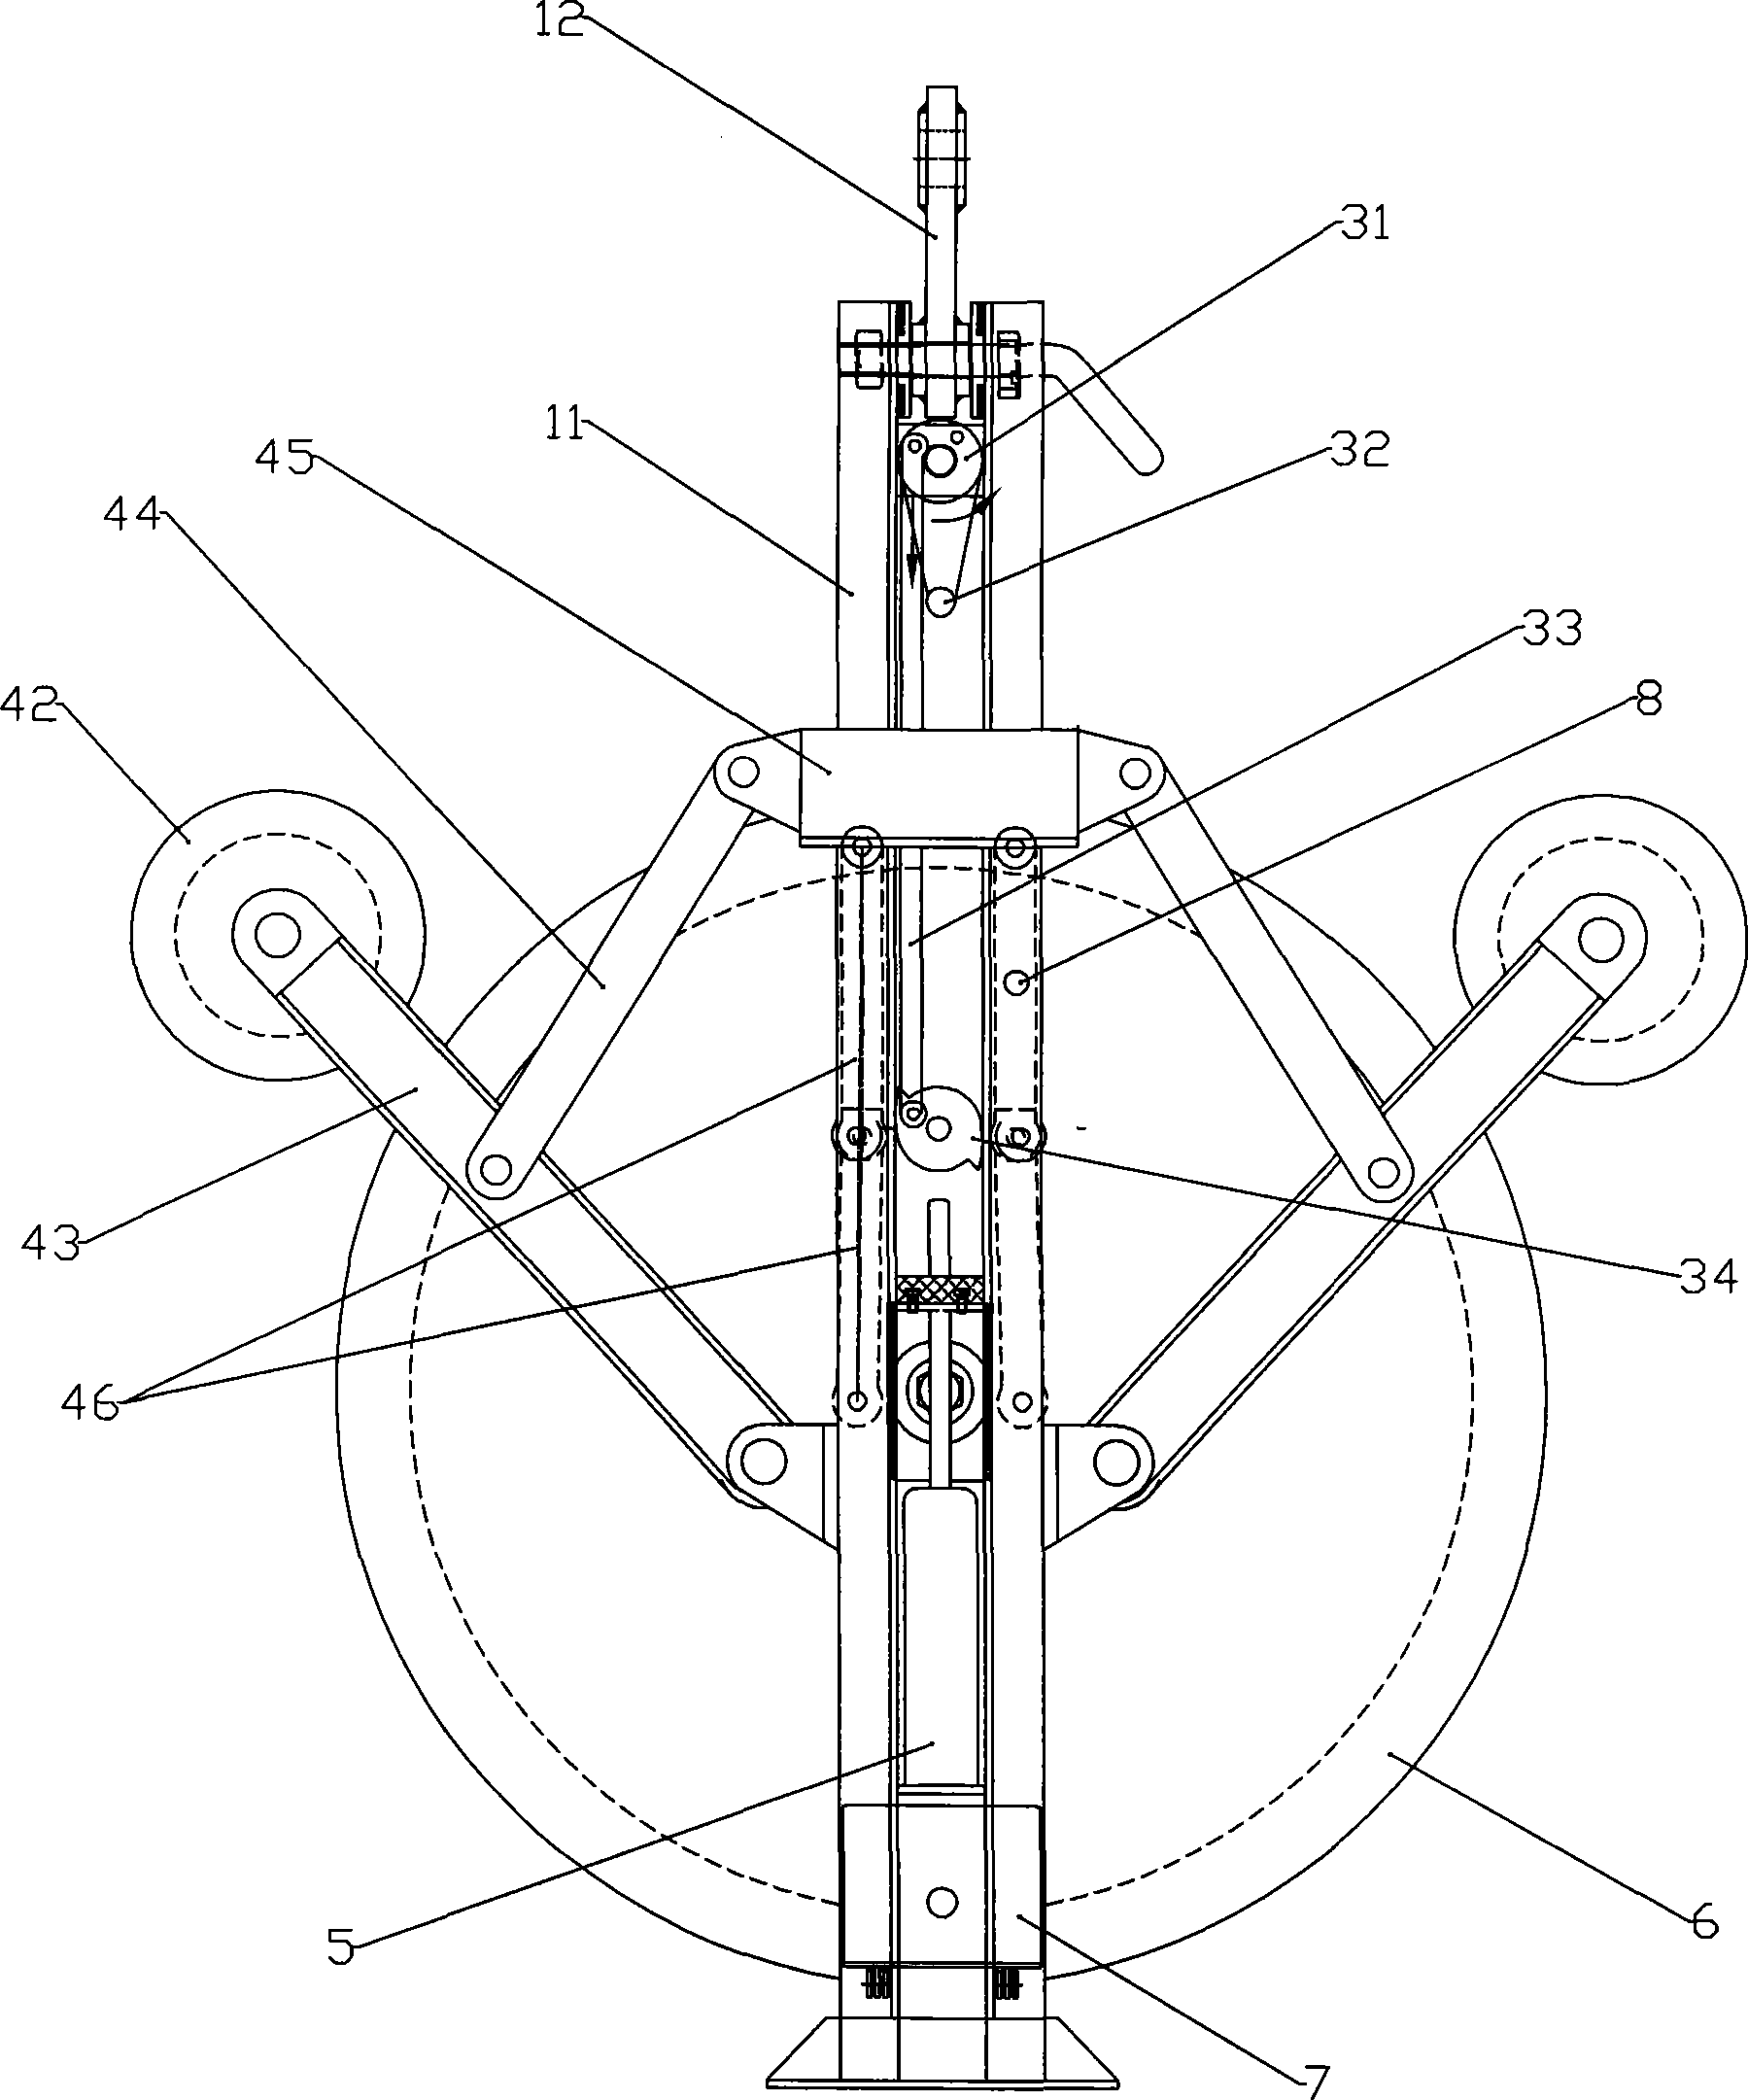 Method suitable for tension stringing of ultra-high voltage wire